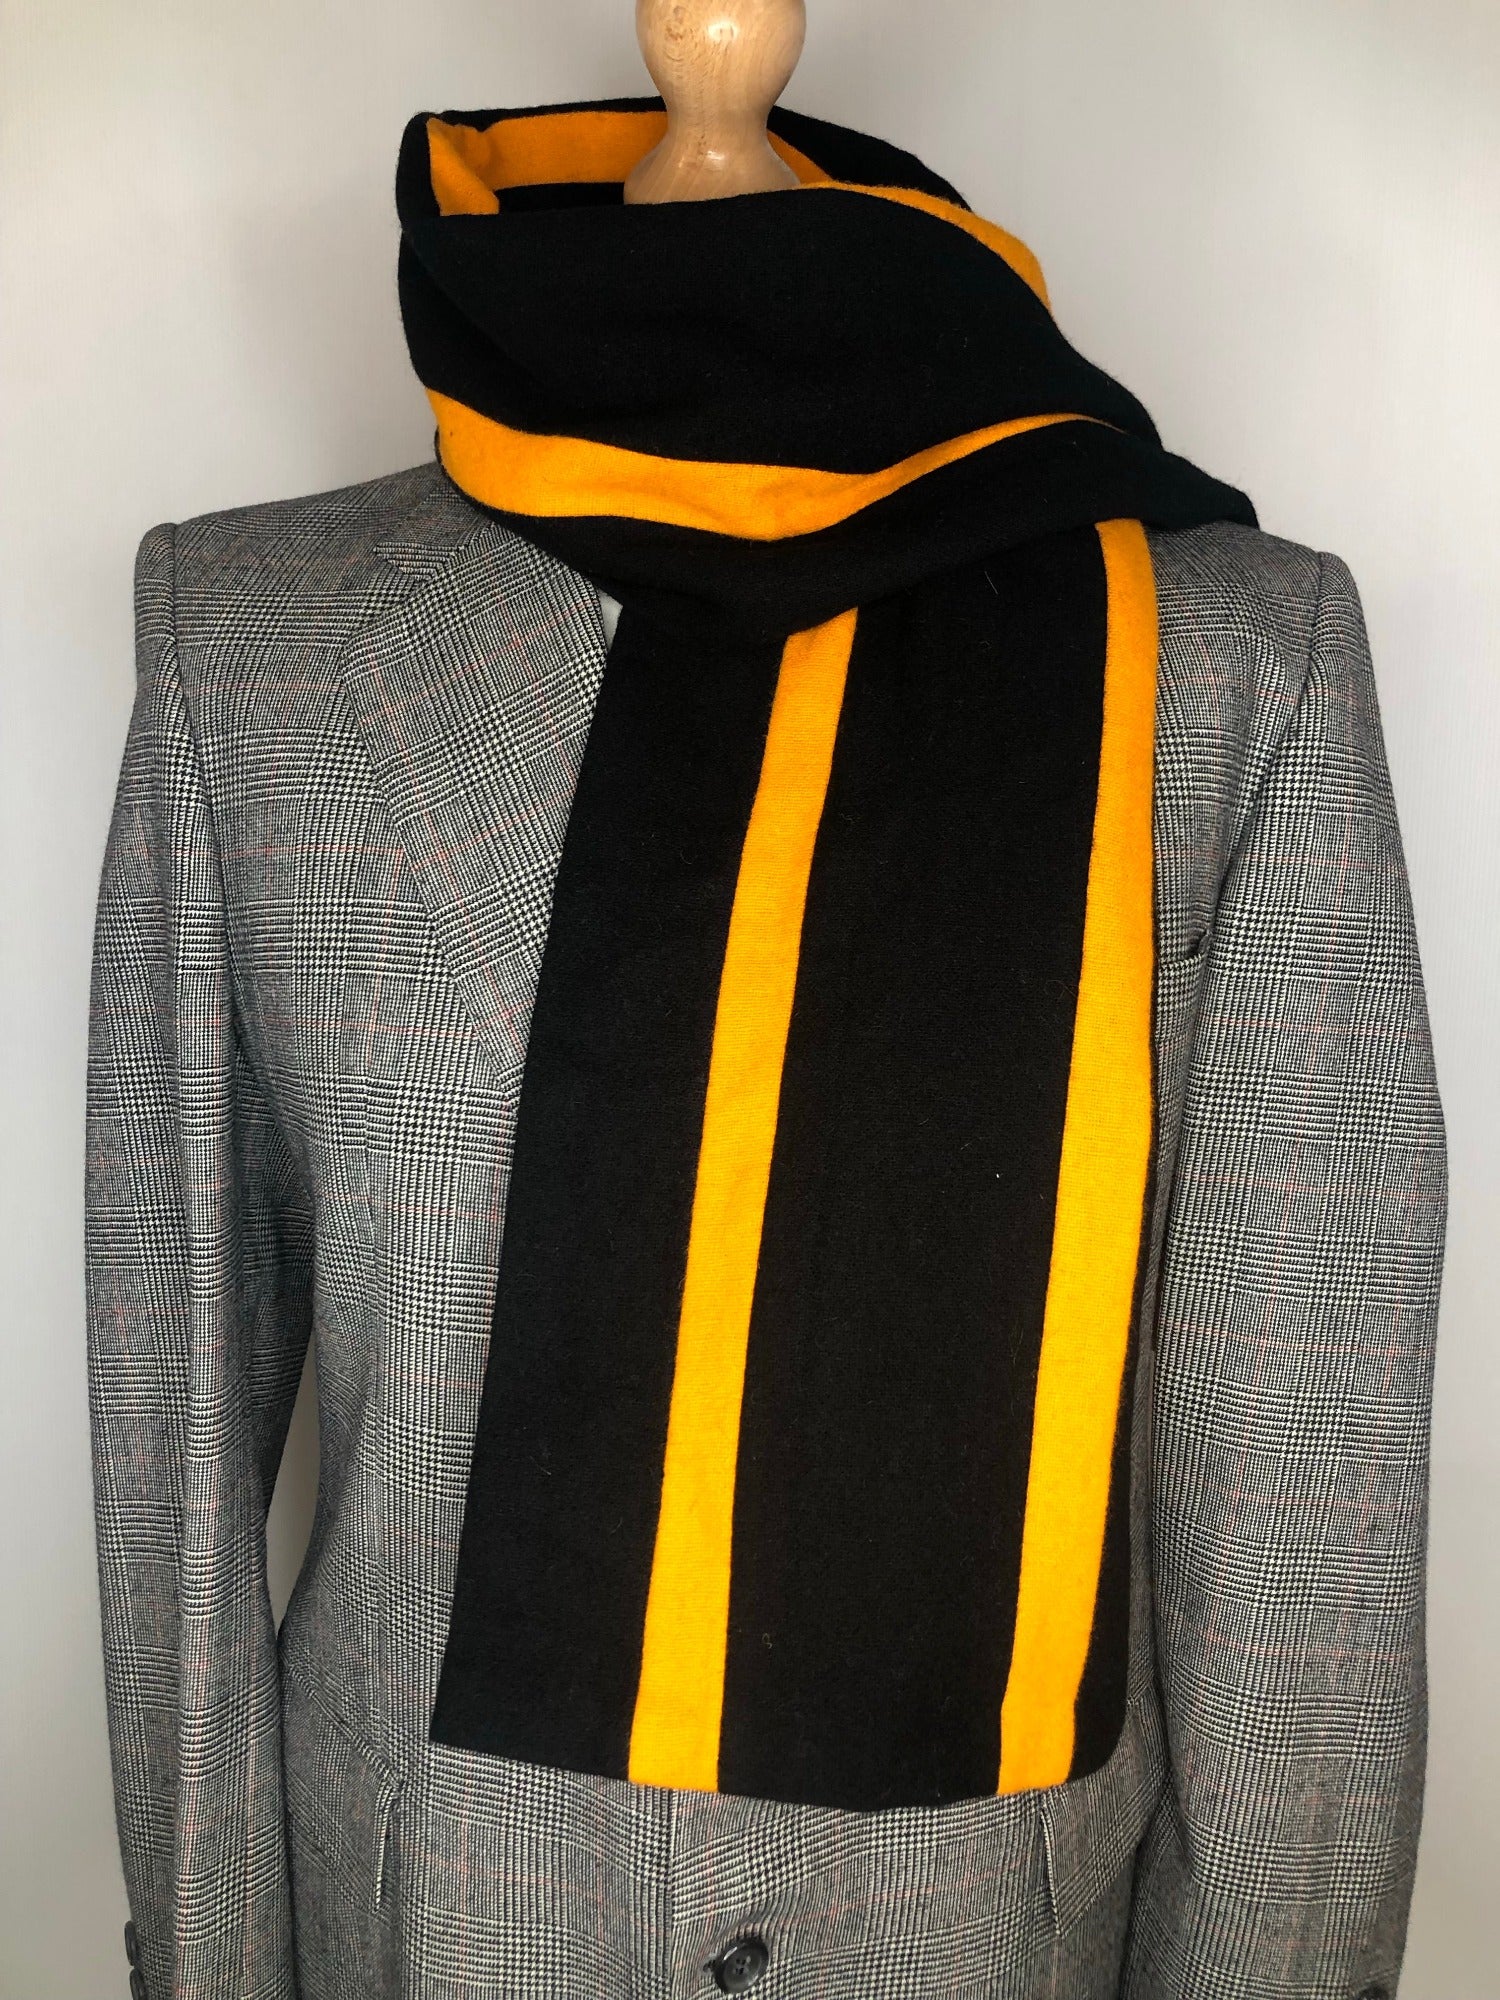 Yellow  Wool Blend  wool  vintage  Urban Village Vintage  urban village  Stripes  striped  shepard and woodward oxford  pure wool  One Size  MOD  college scarf  black  60s  1960s  100% Wool